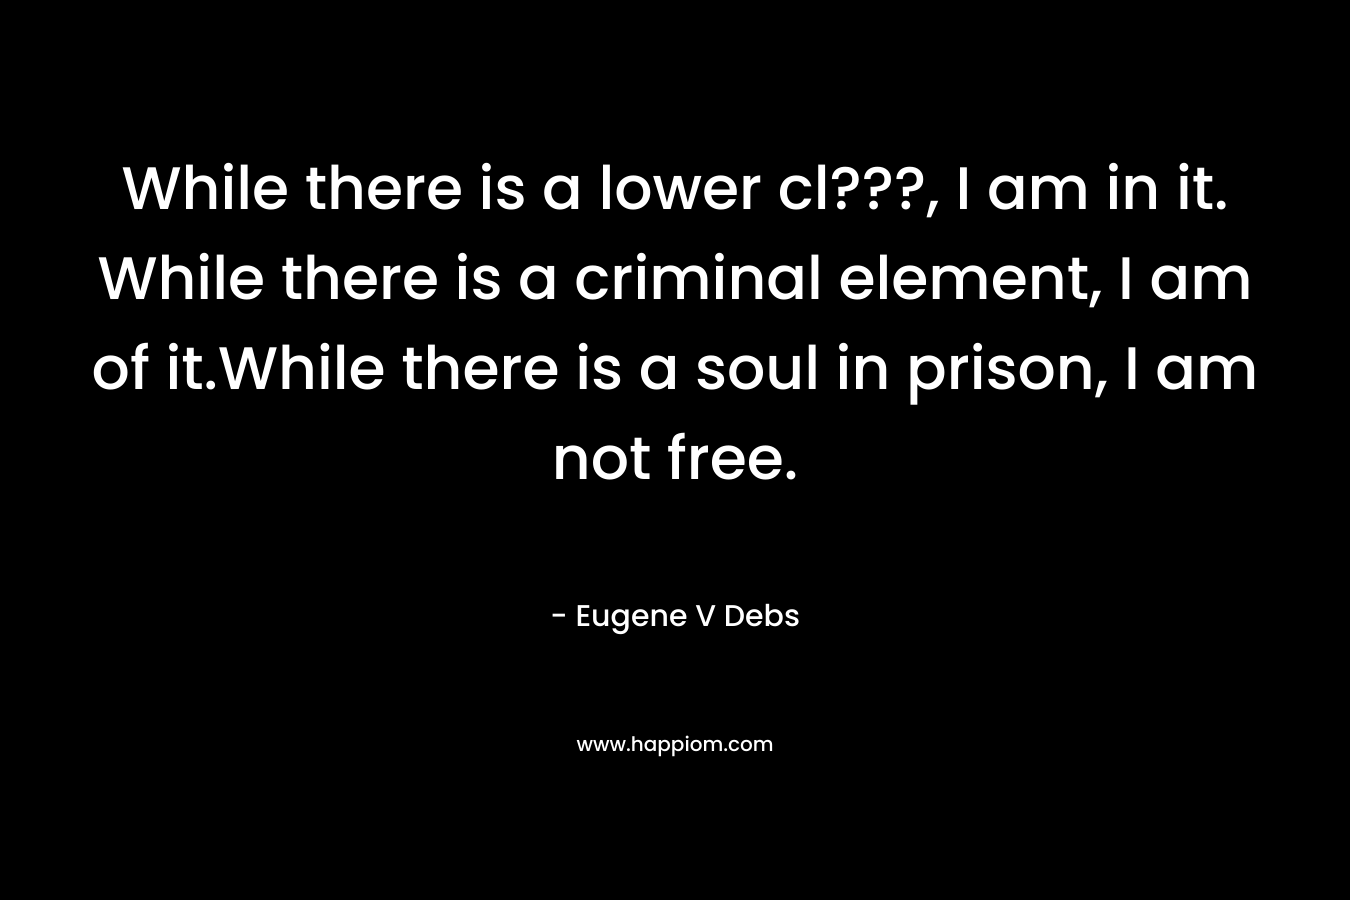 While there is a lower cl???, I am in it. While there is a criminal element, I am of it.While there is a soul in prison, I am not free.